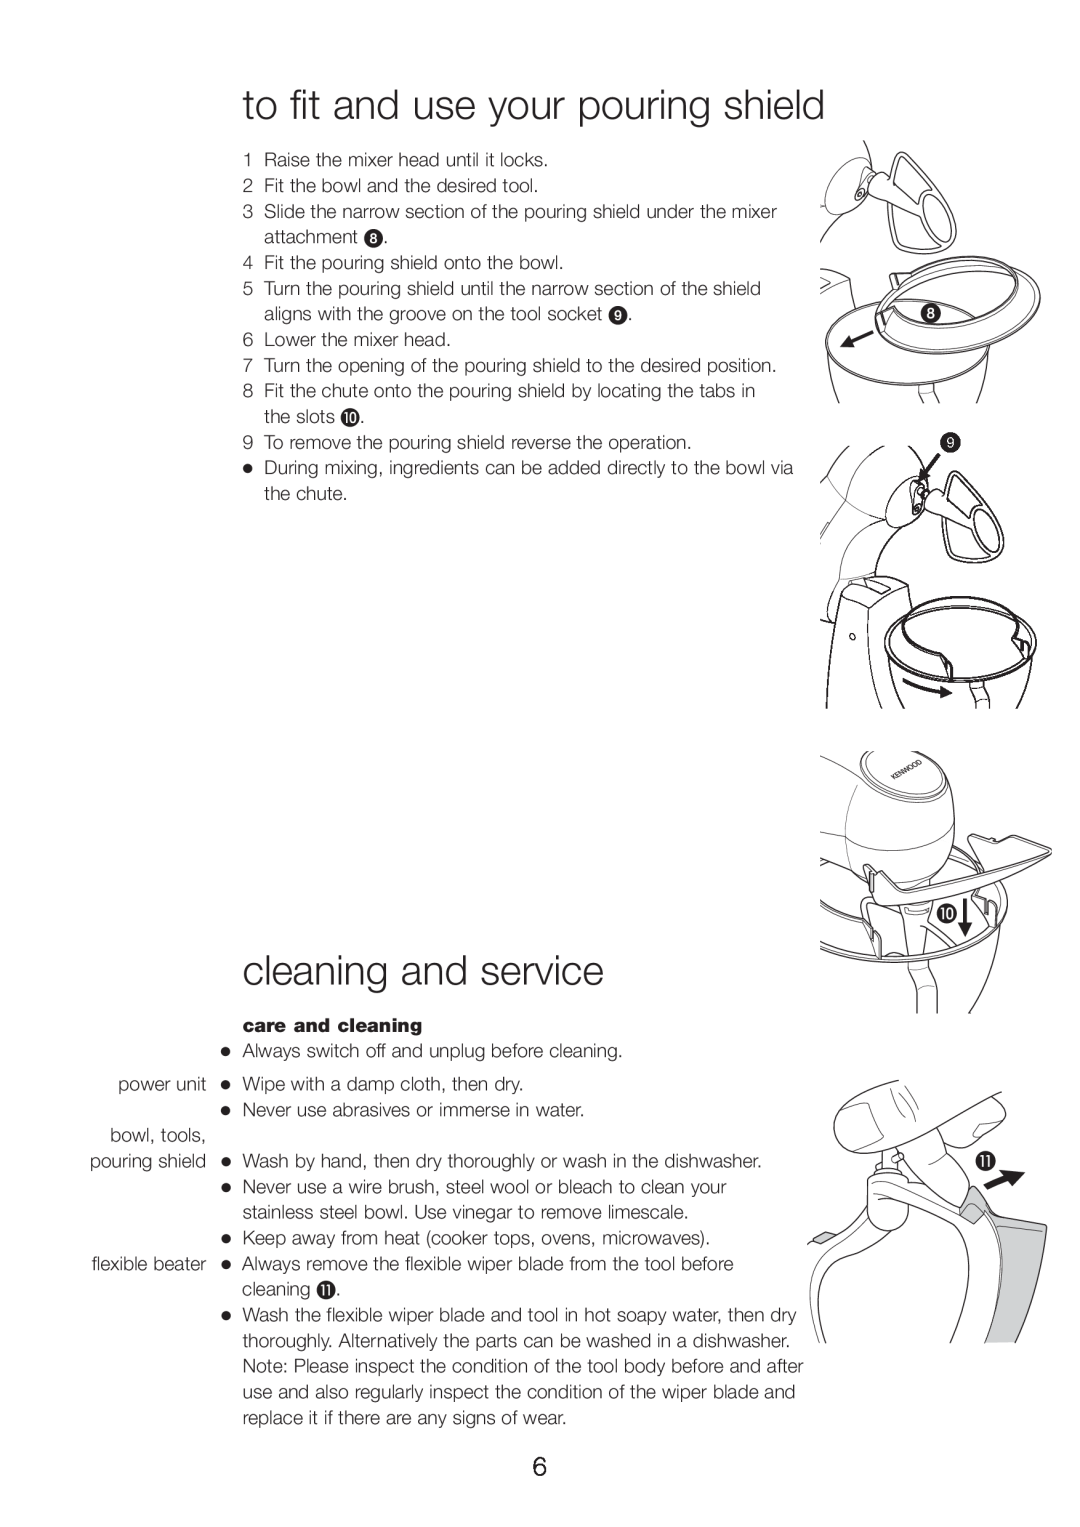 Kenwood MX320 series, MX310 series manual to fit and use your pouring shield, cleaning and service, care and cleaning 